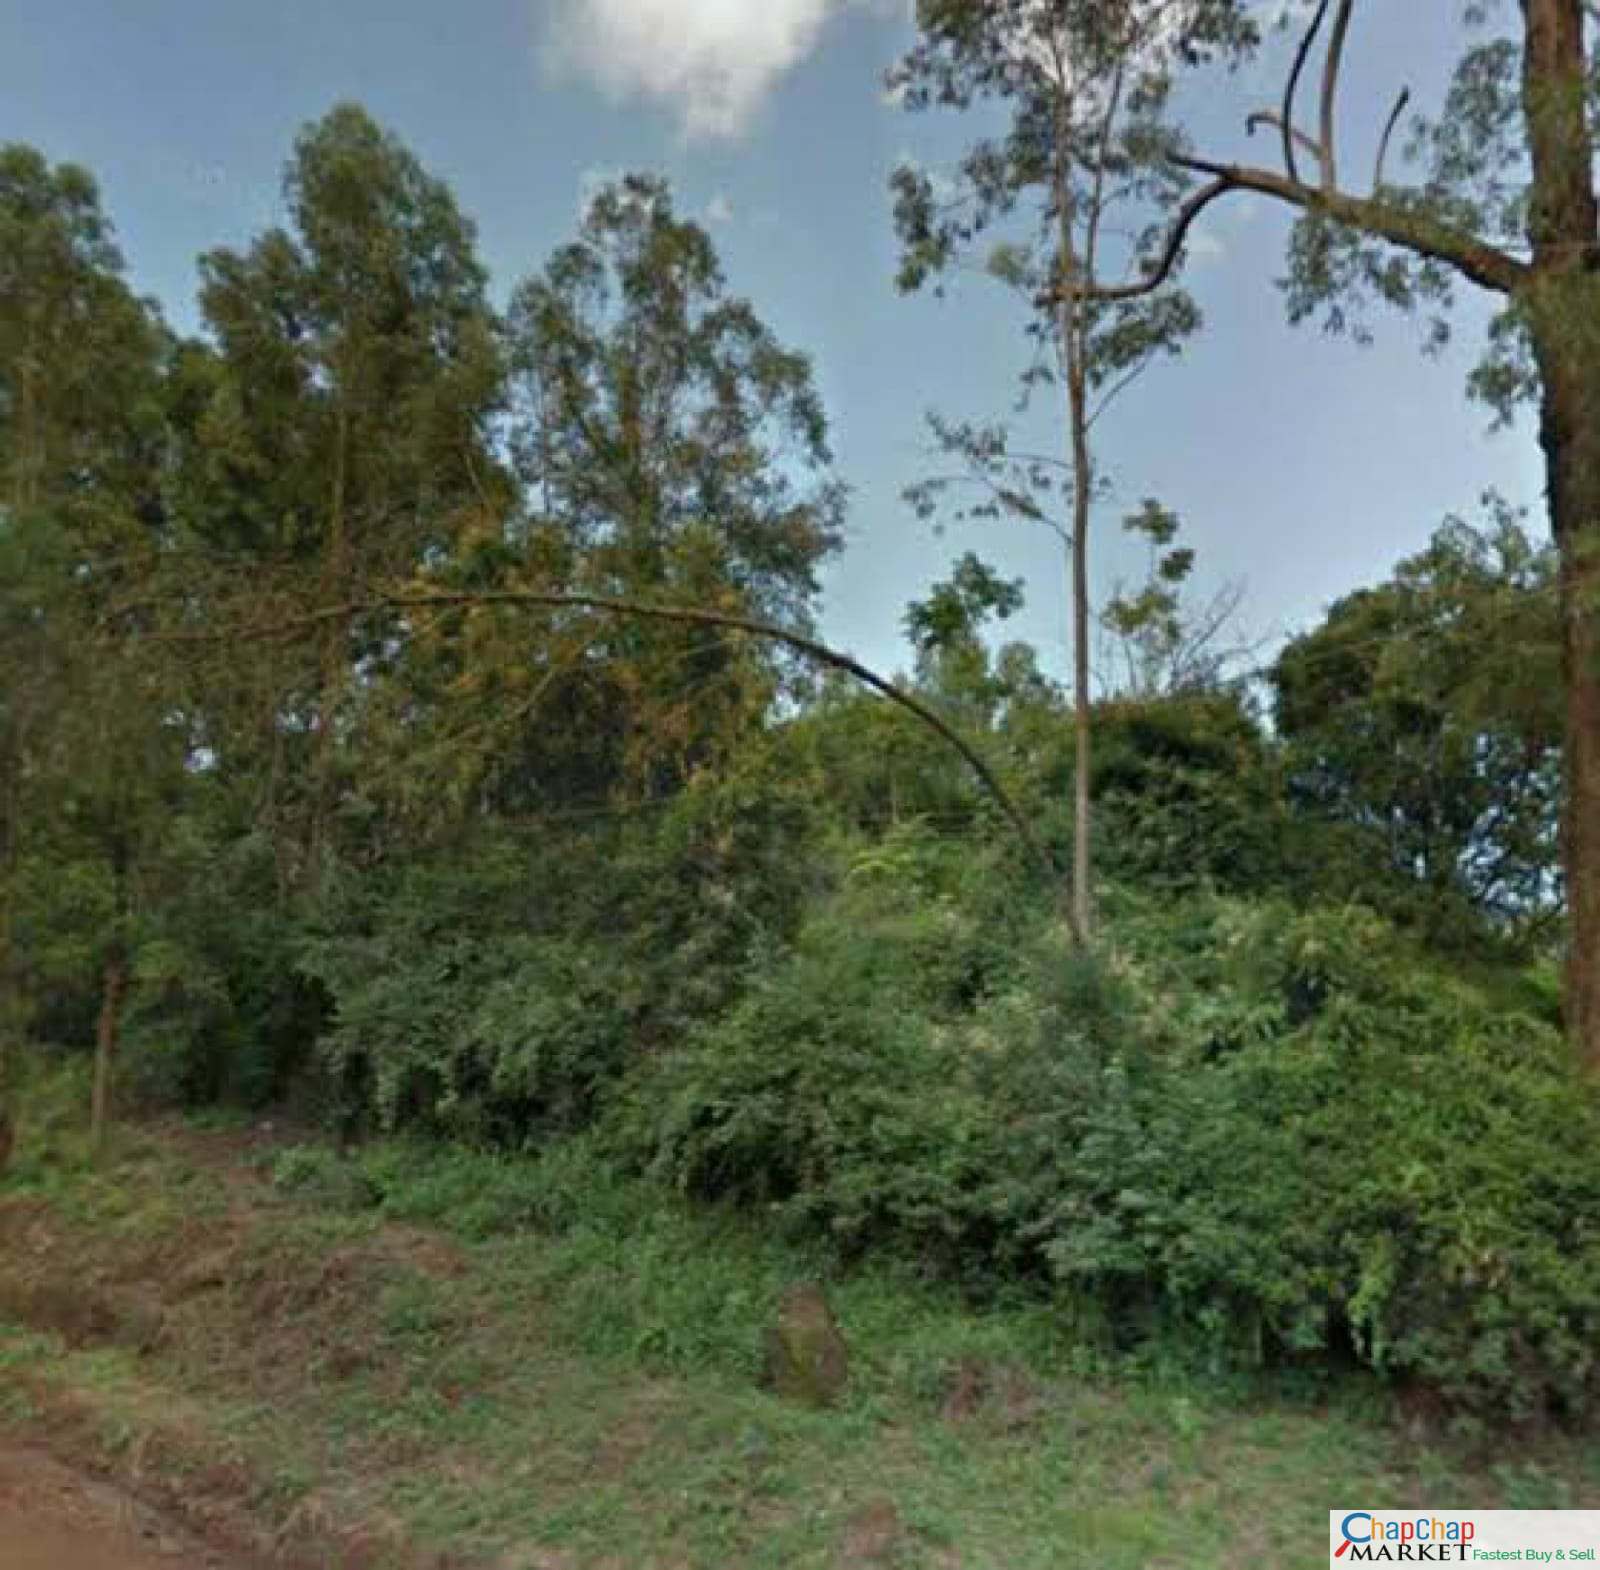 Real Estate Land For Sale-List of 100 Land For Sale In Karen Kenya Ready Clean Title Deed, House For Sale and Rent BEST PRICES acre Acres 26